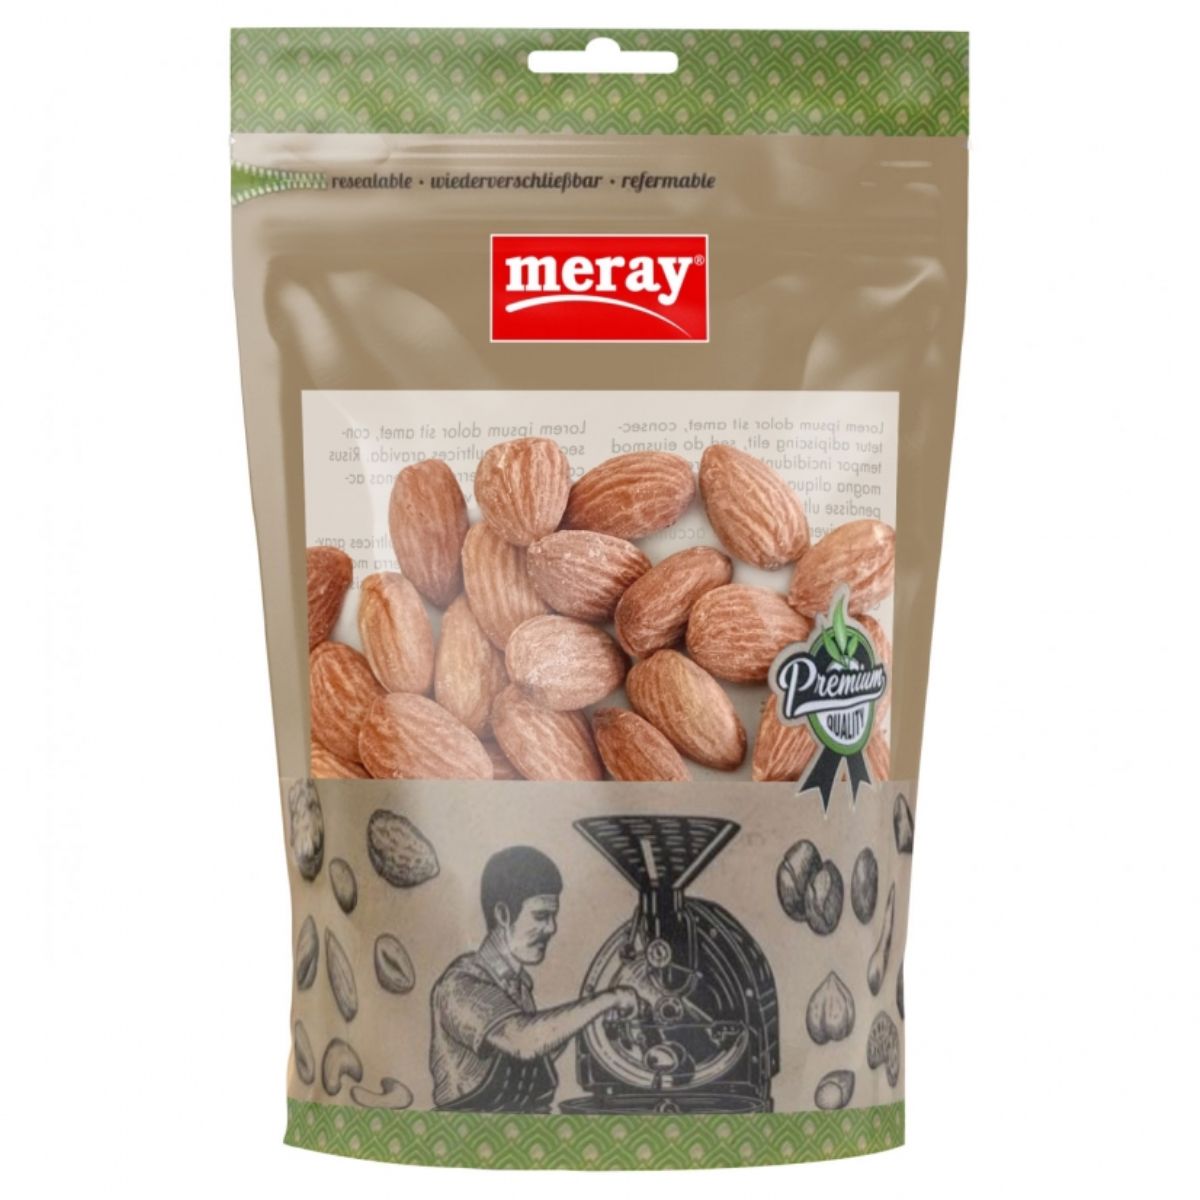 Meray - Almond Kernels Roasted & Salted - 150g in a bag on a white background.